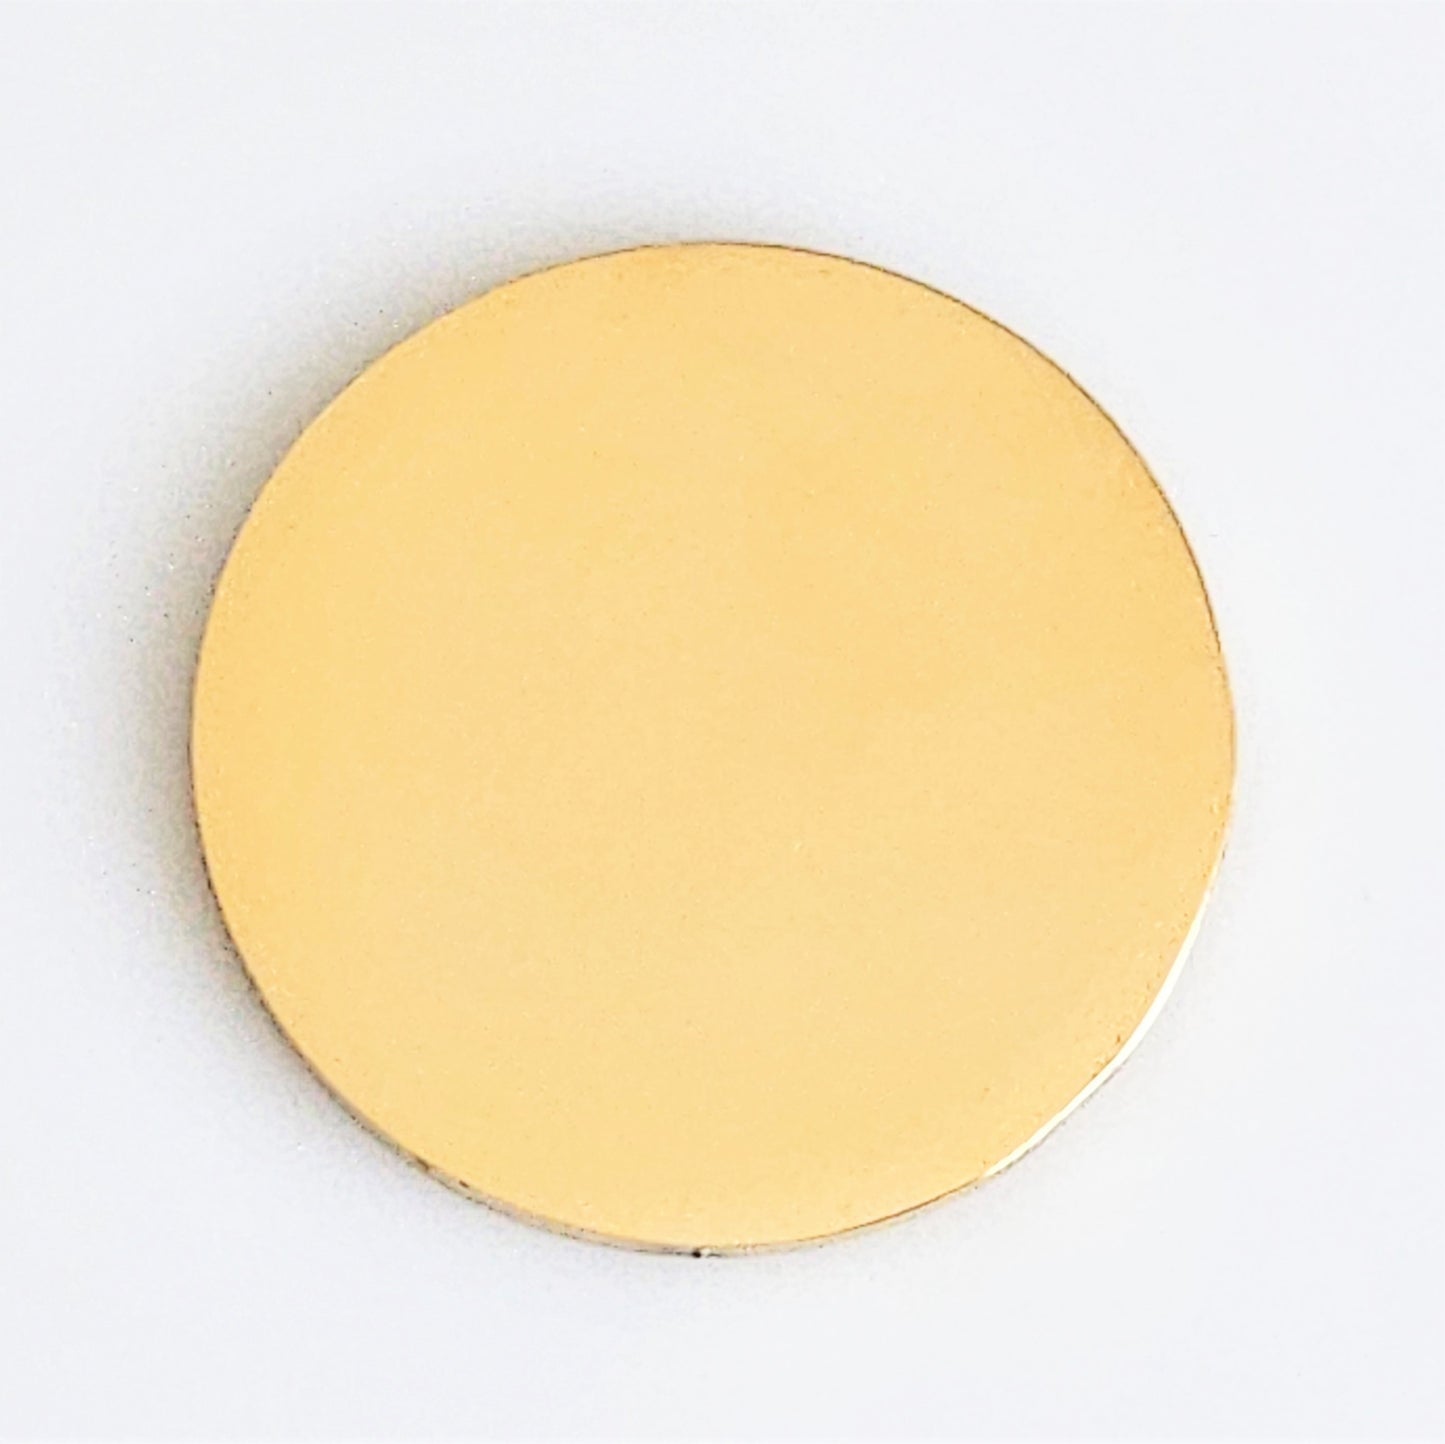 Gold Plated Stainless Steel - 1" Circle (no hole)